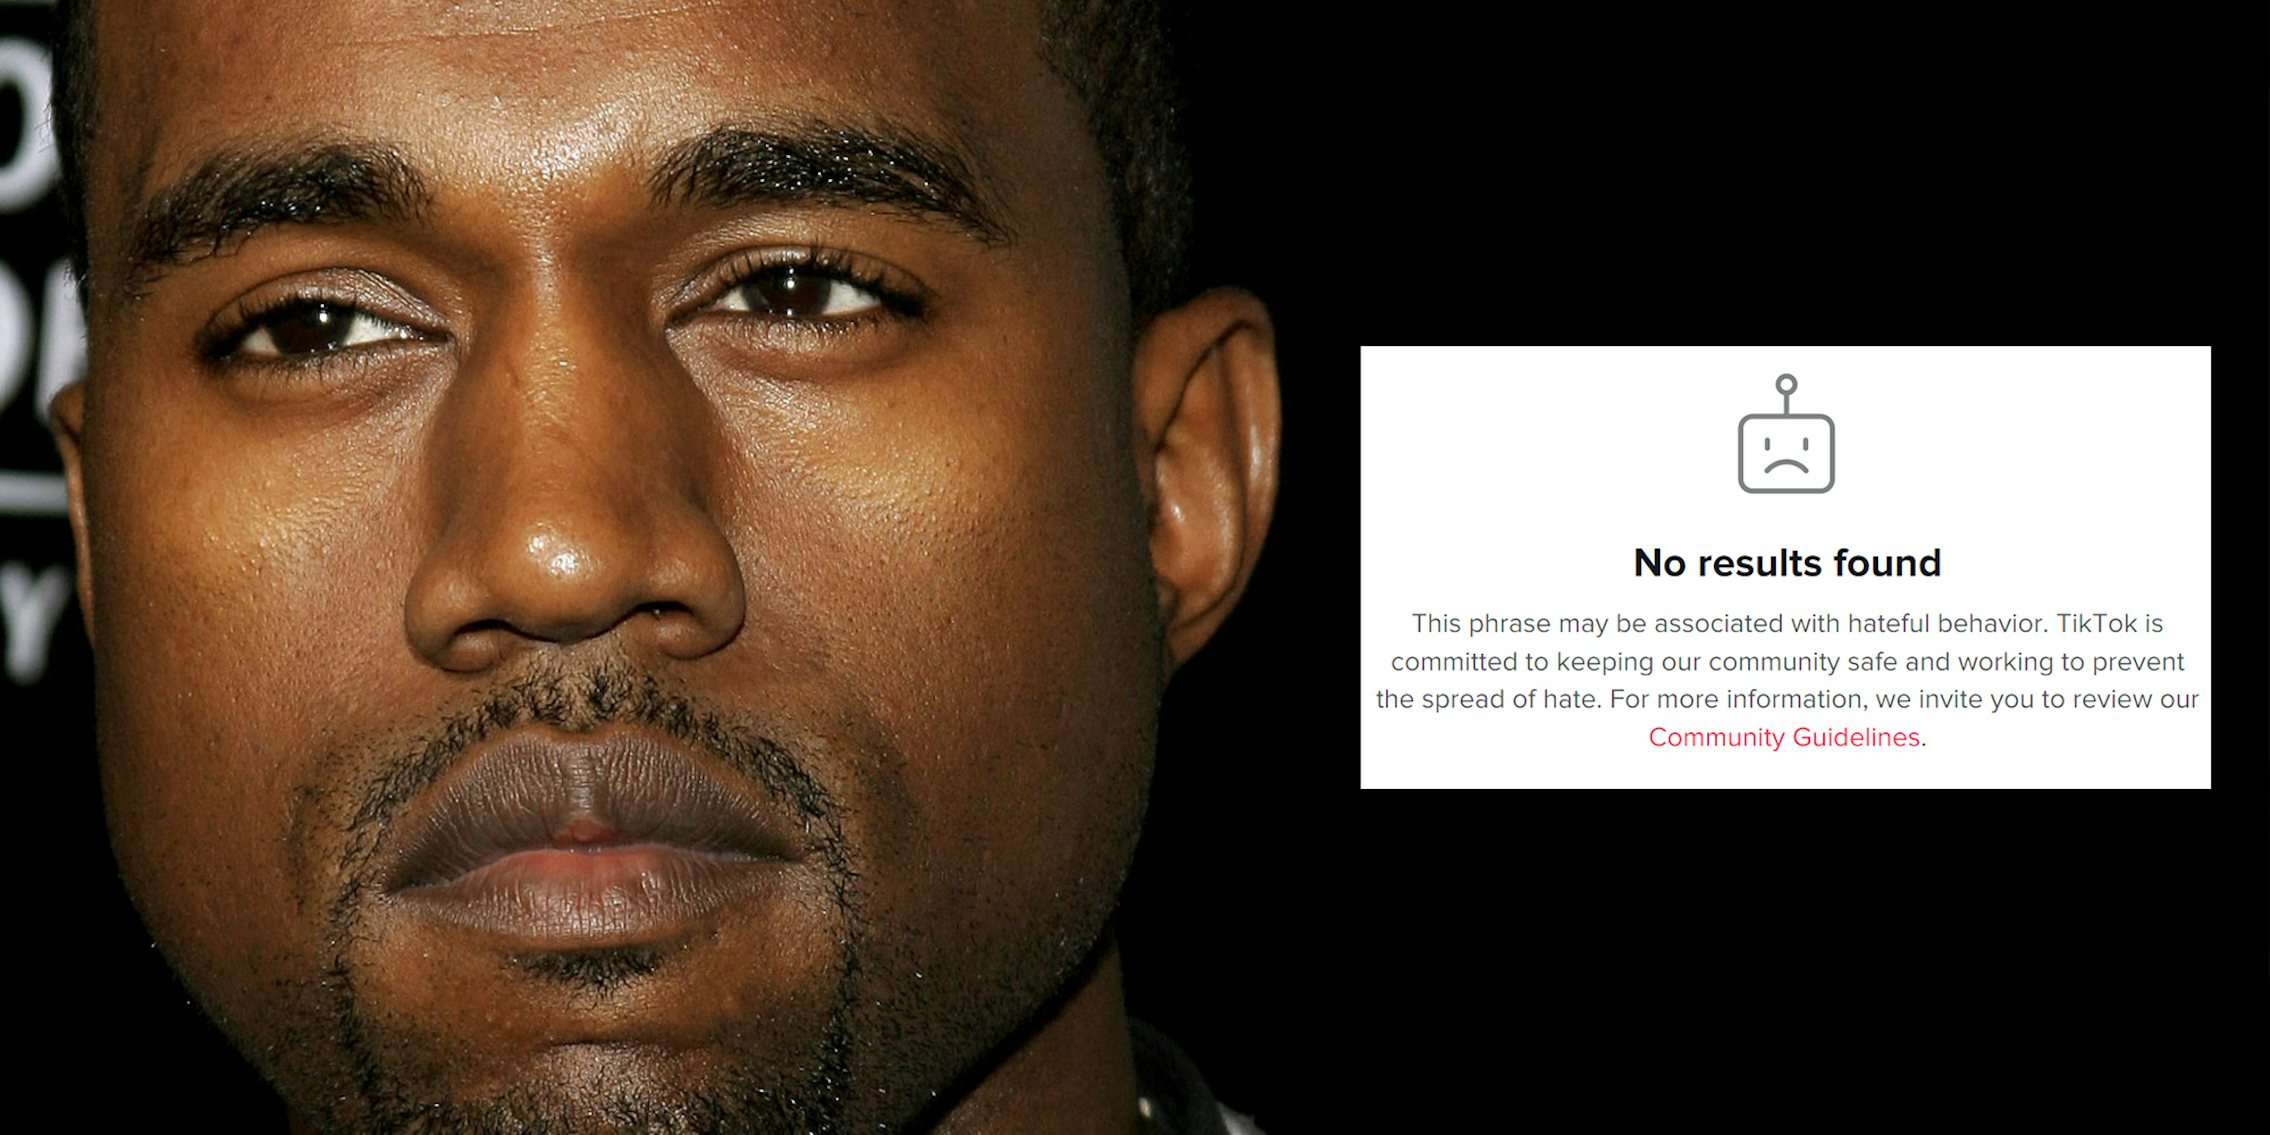 Kanye West with tiktok 'No results found - this phrase may be associated with hateful behavior. TikTok is committed to keeping our community safe and working to prevent the spread of hate. For more information, we invite you to review our Community Guidelines.'